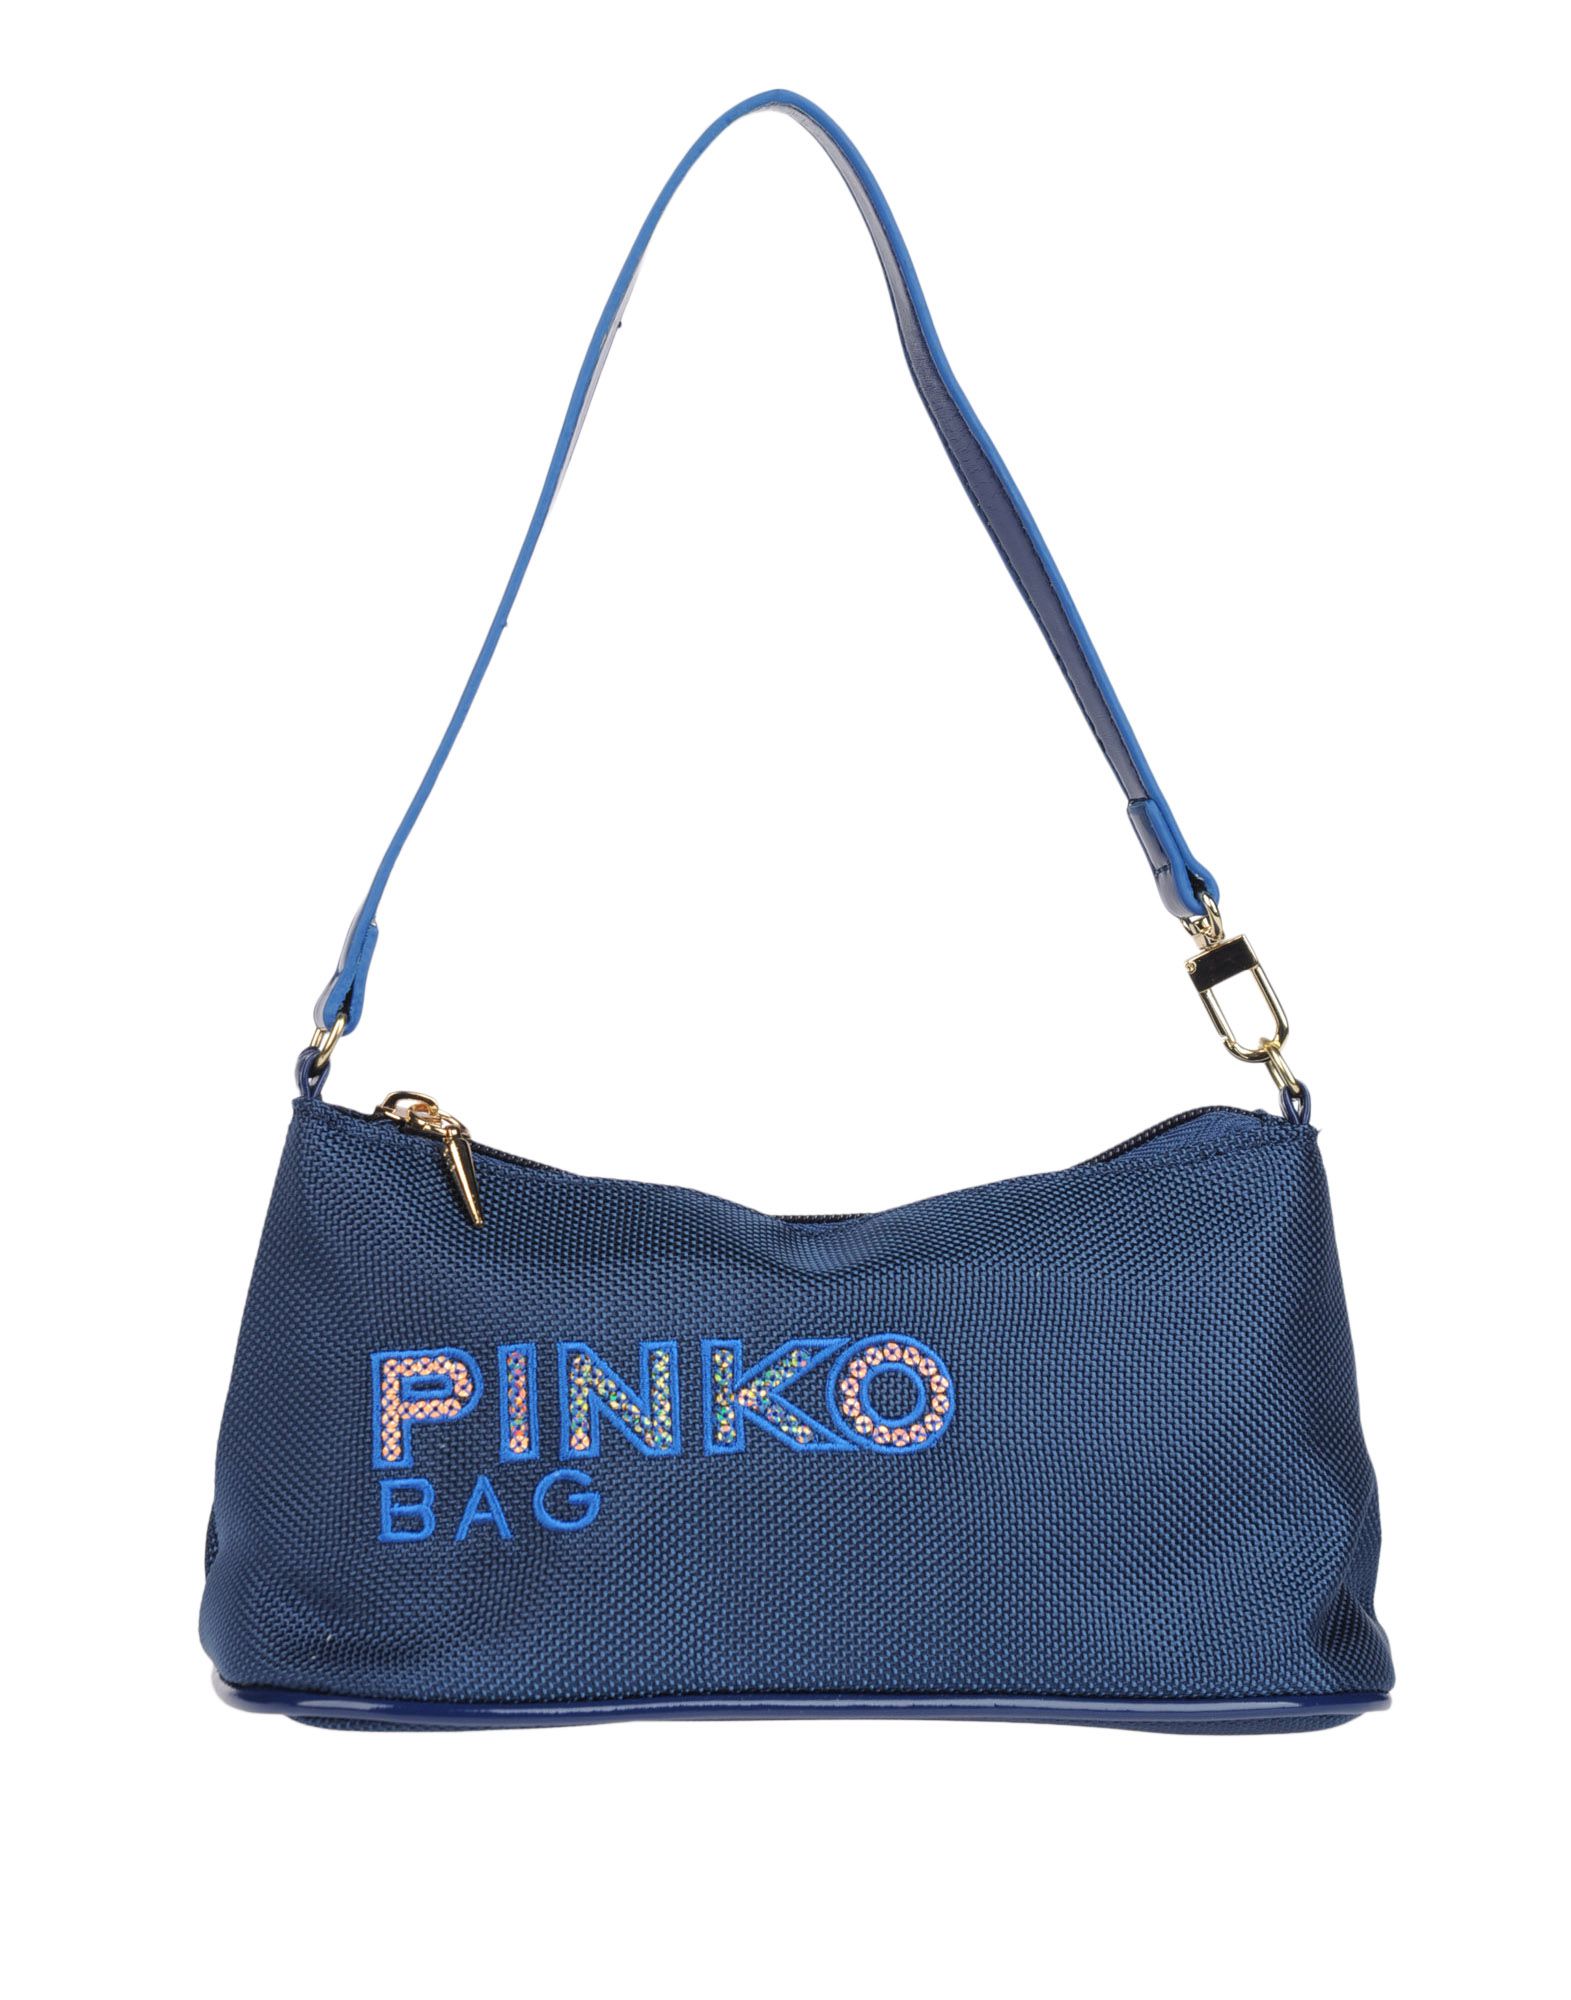 Lyst - Pinko Small Fabric Bag in Blue